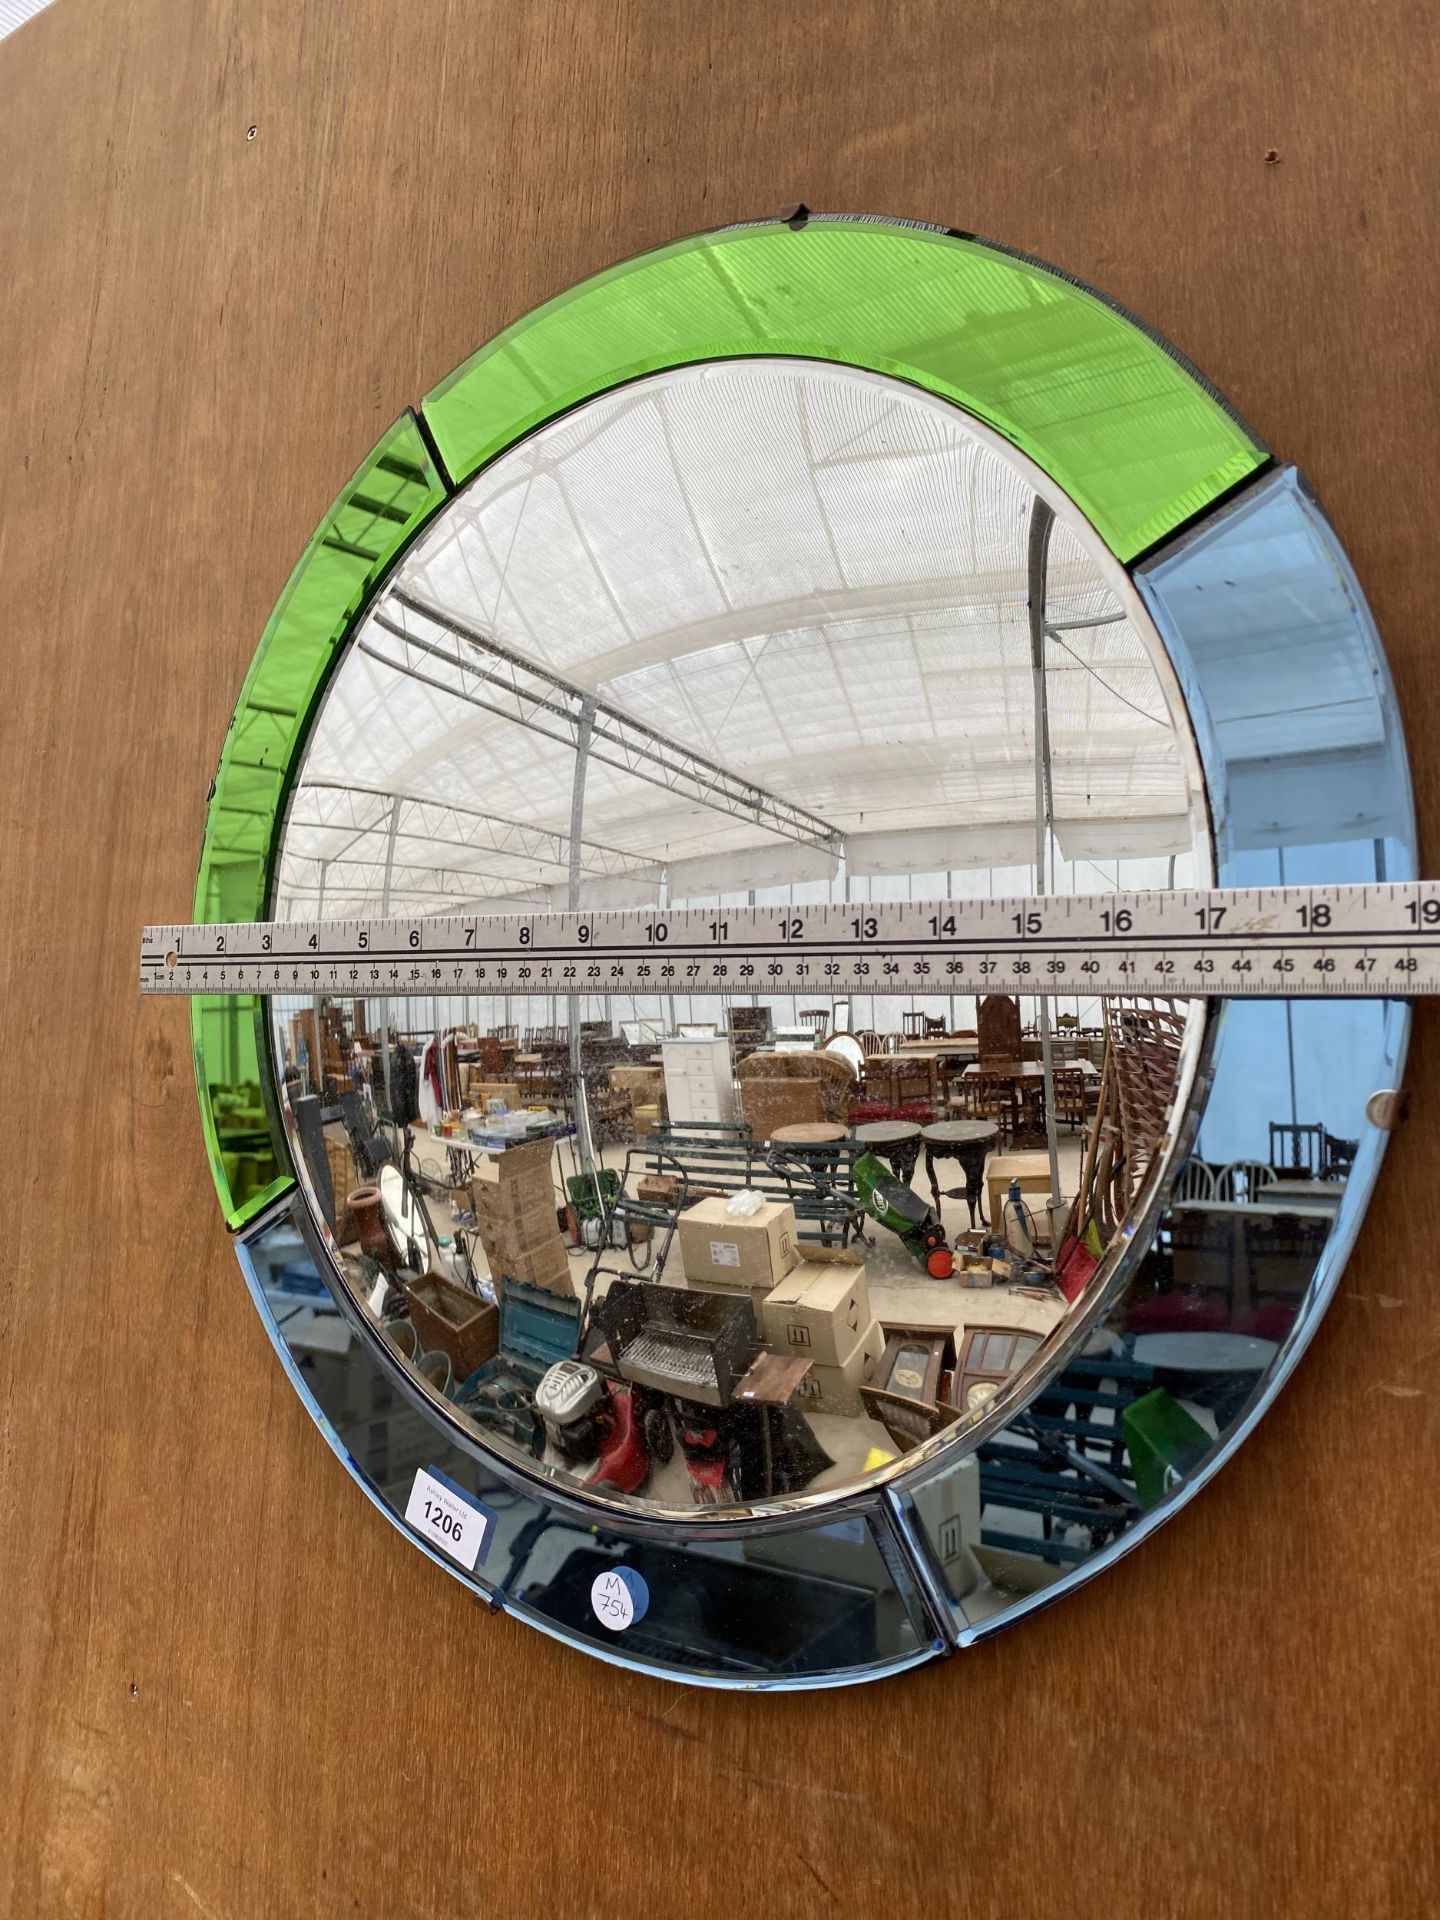 AN ART DECO STYLE MIRROR WITH BLUE AND GREEN OUTER FRAME - Image 3 of 3